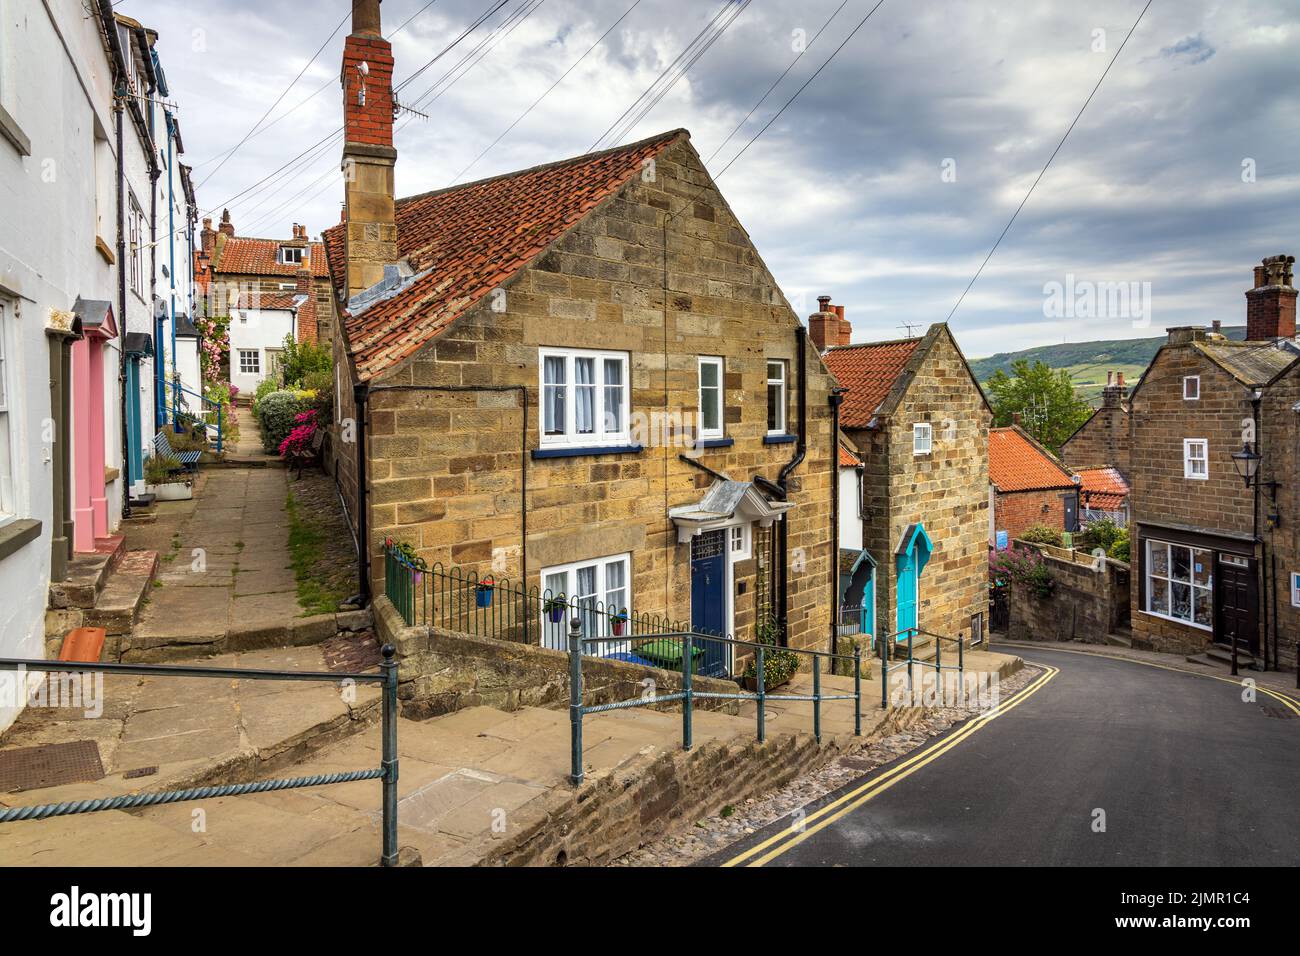 The steep hill leading down to the seafront and beach in the old fishing and smuggling village of Robin Hood's Bay in North Yorkshire, England. Stock Photo